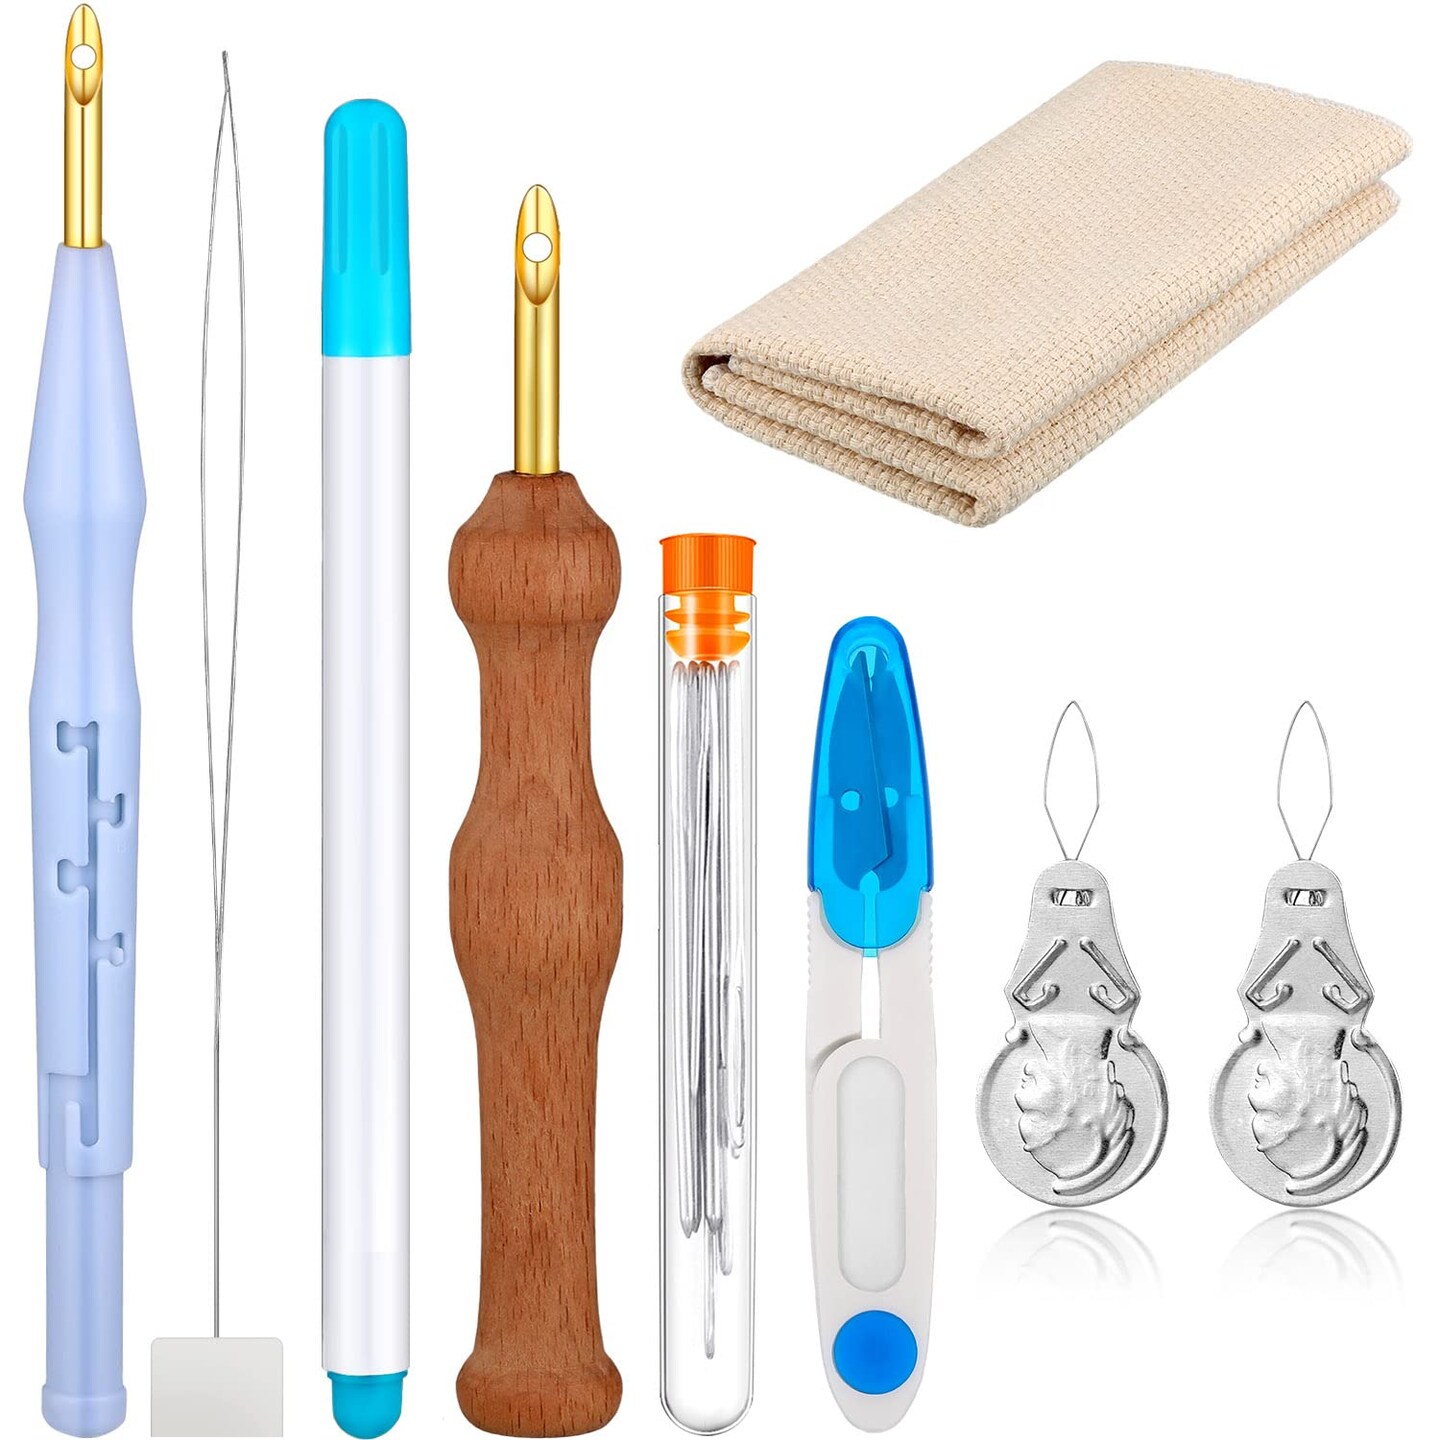 17 Piece Punch Needle Embroidery Kits Adjustable Rug Yarn Punch Needle Wooden Handle Embroidery Pen Needle Threader Punch Needle Cloth for Embroidery Floss Cross Stitching Beginner (Blue, Sky Blue)